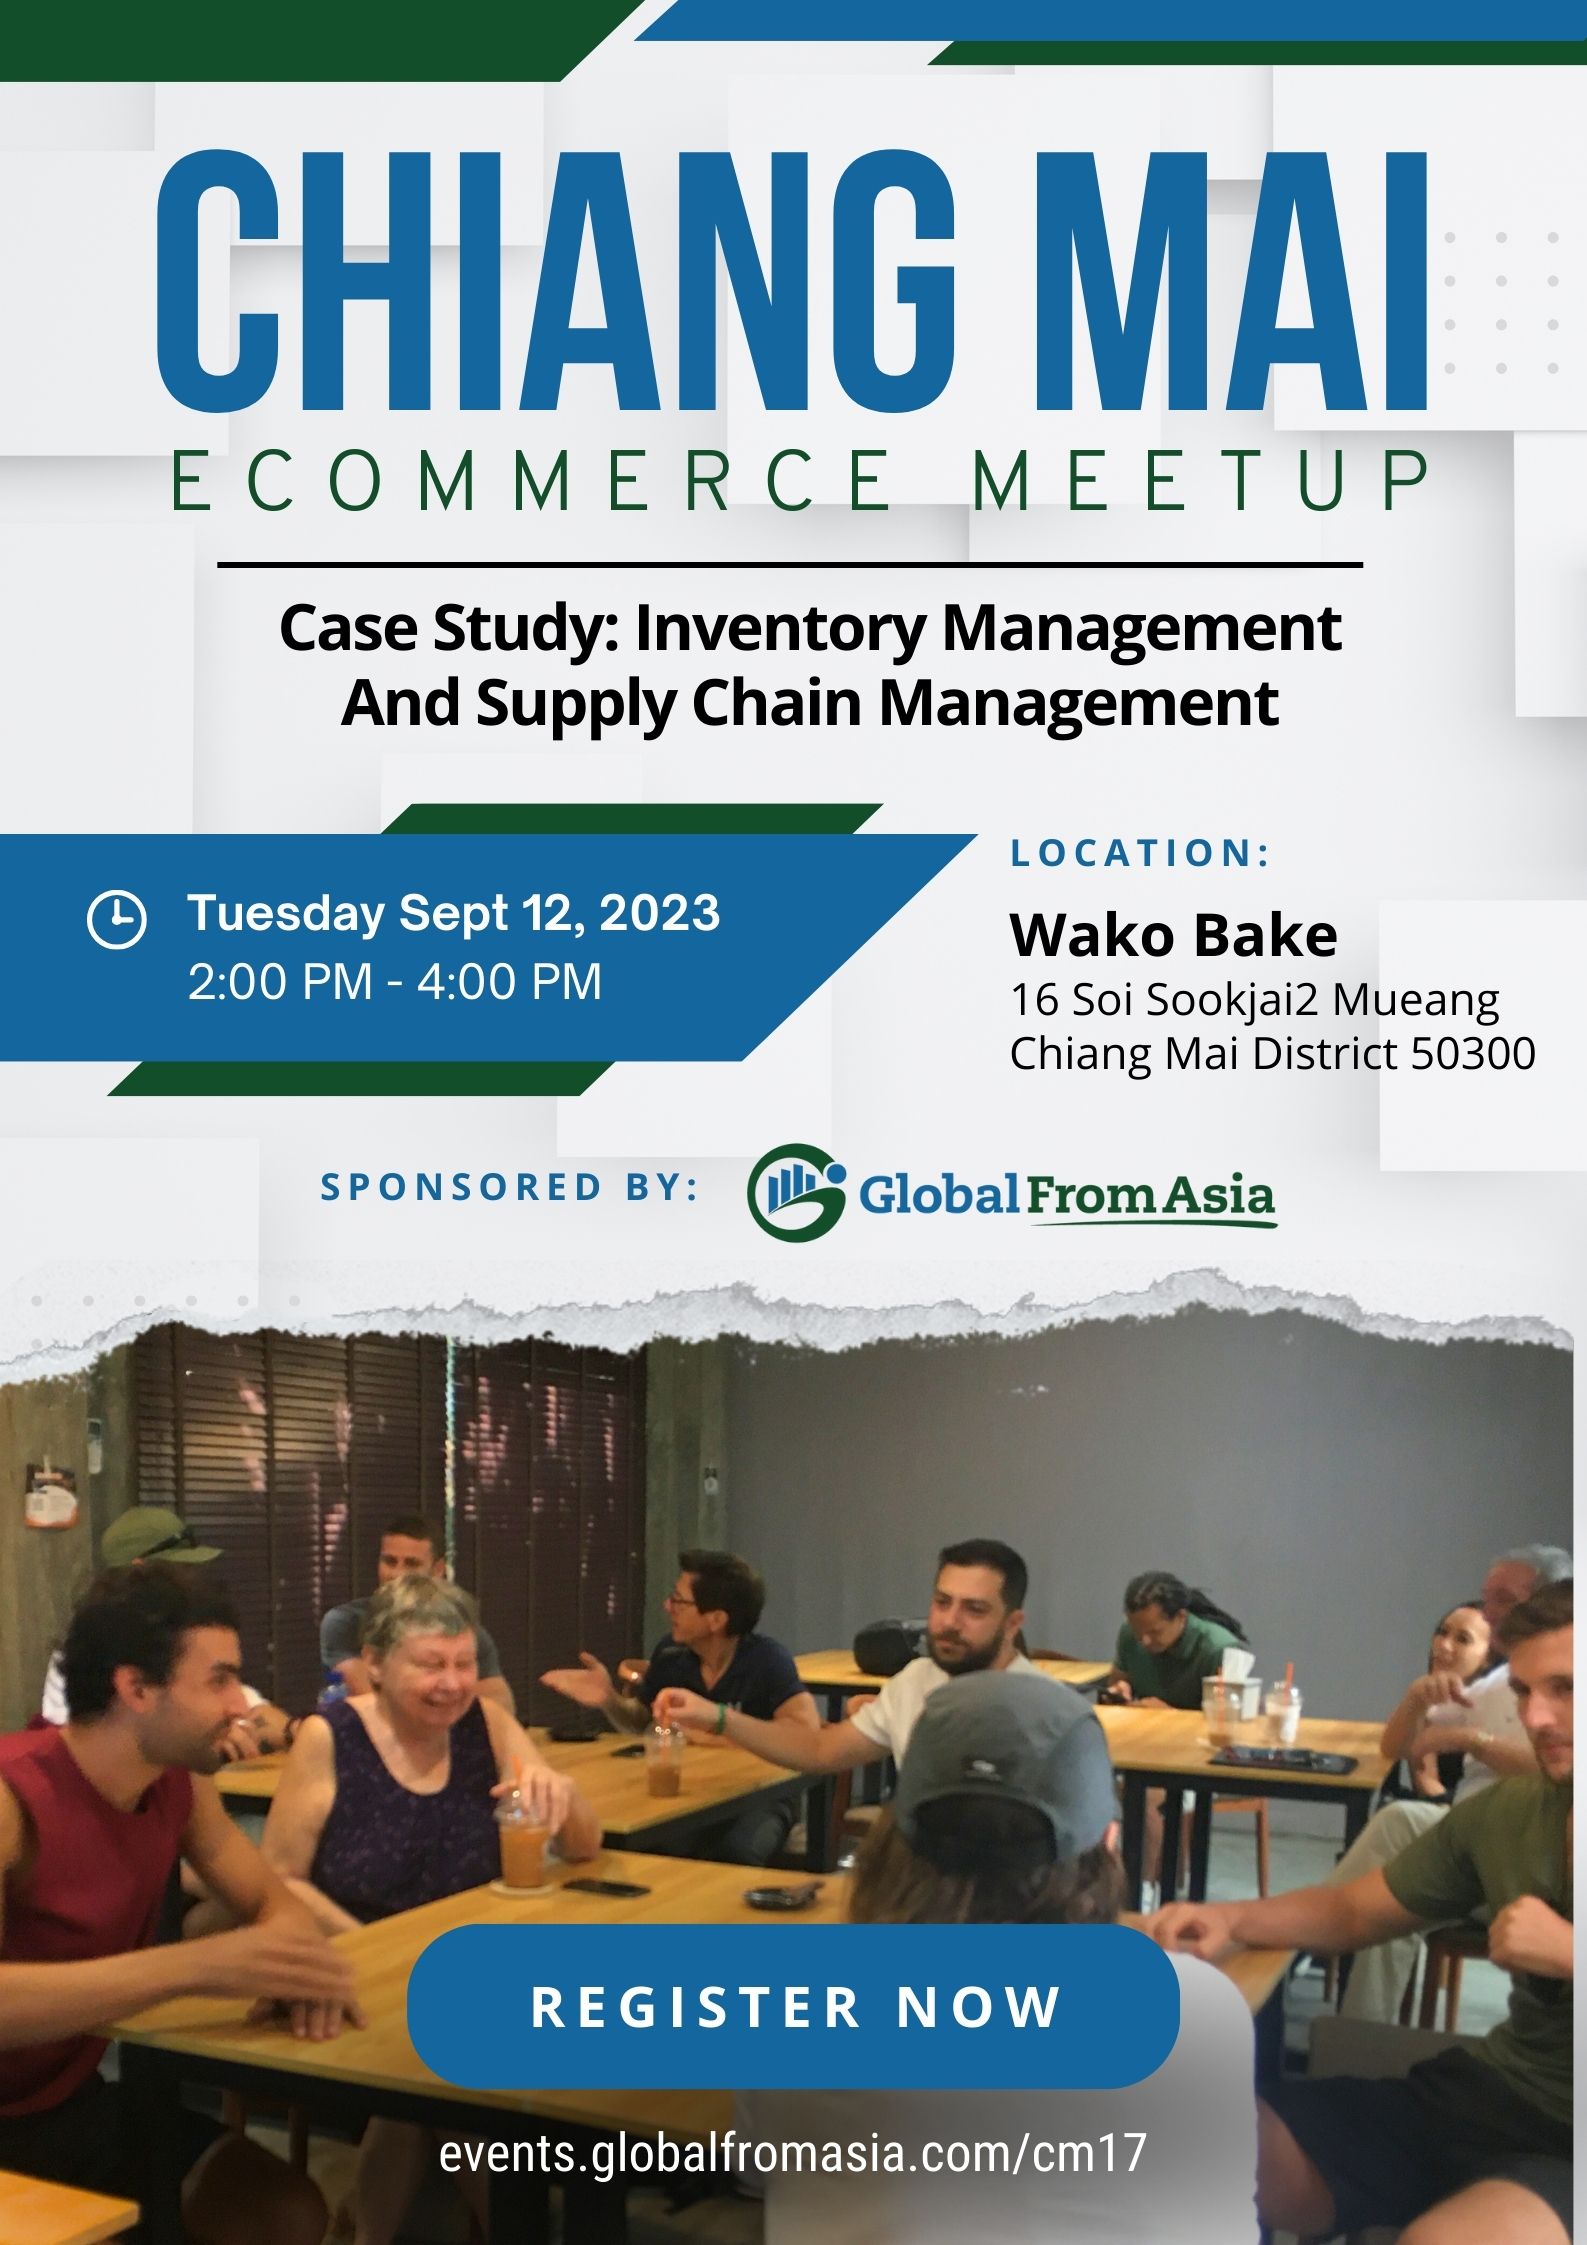 Chiang Mai Meet-up: Case Study: Inventory Management And Supply Chain Management